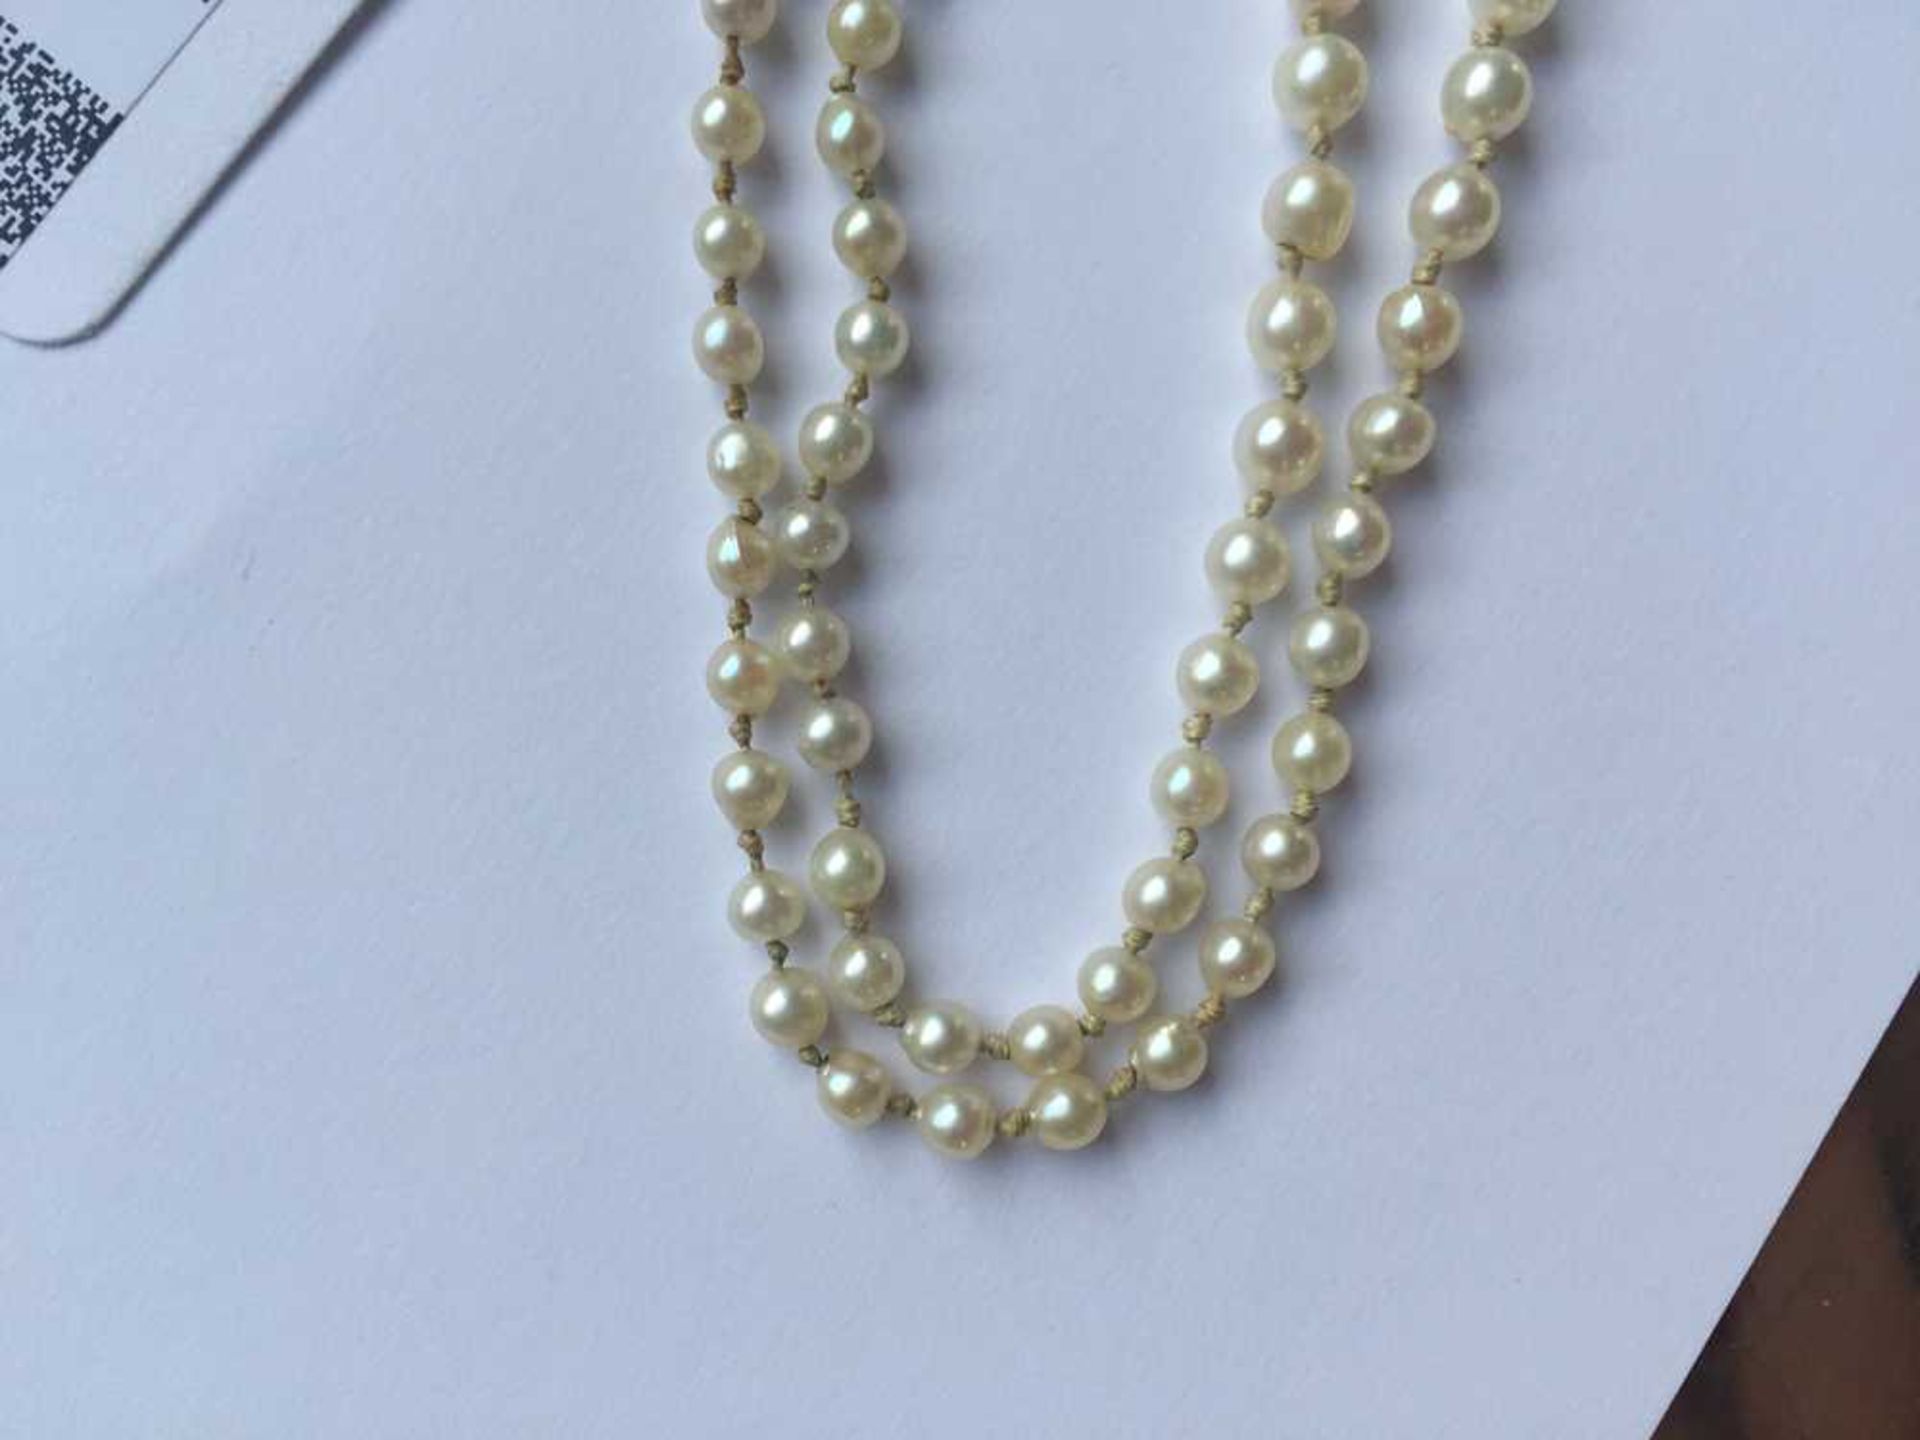 A natural saltwater pearl necklace - Image 11 of 13